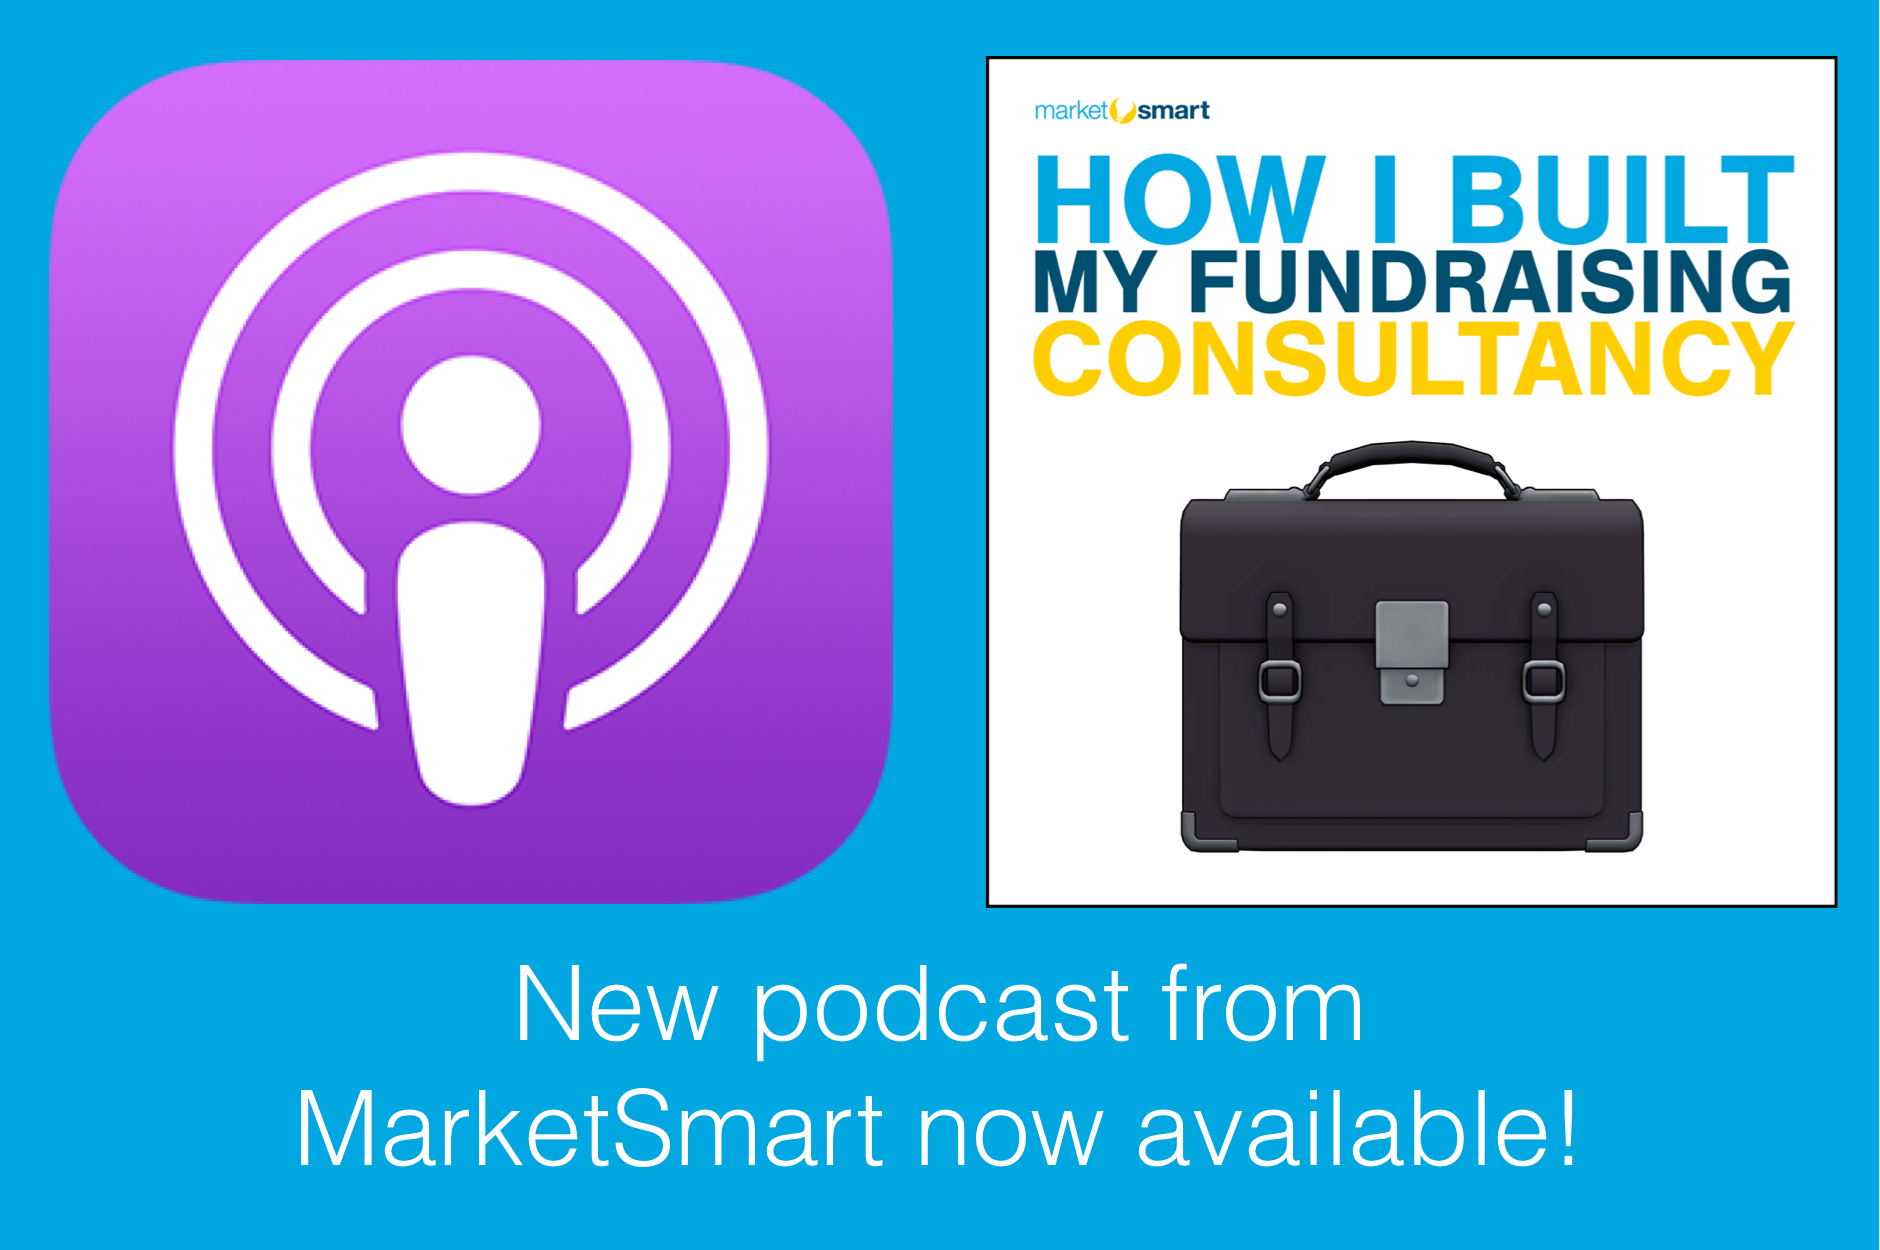 How I Built My Fundraising Consultancy Podcast Now Available!